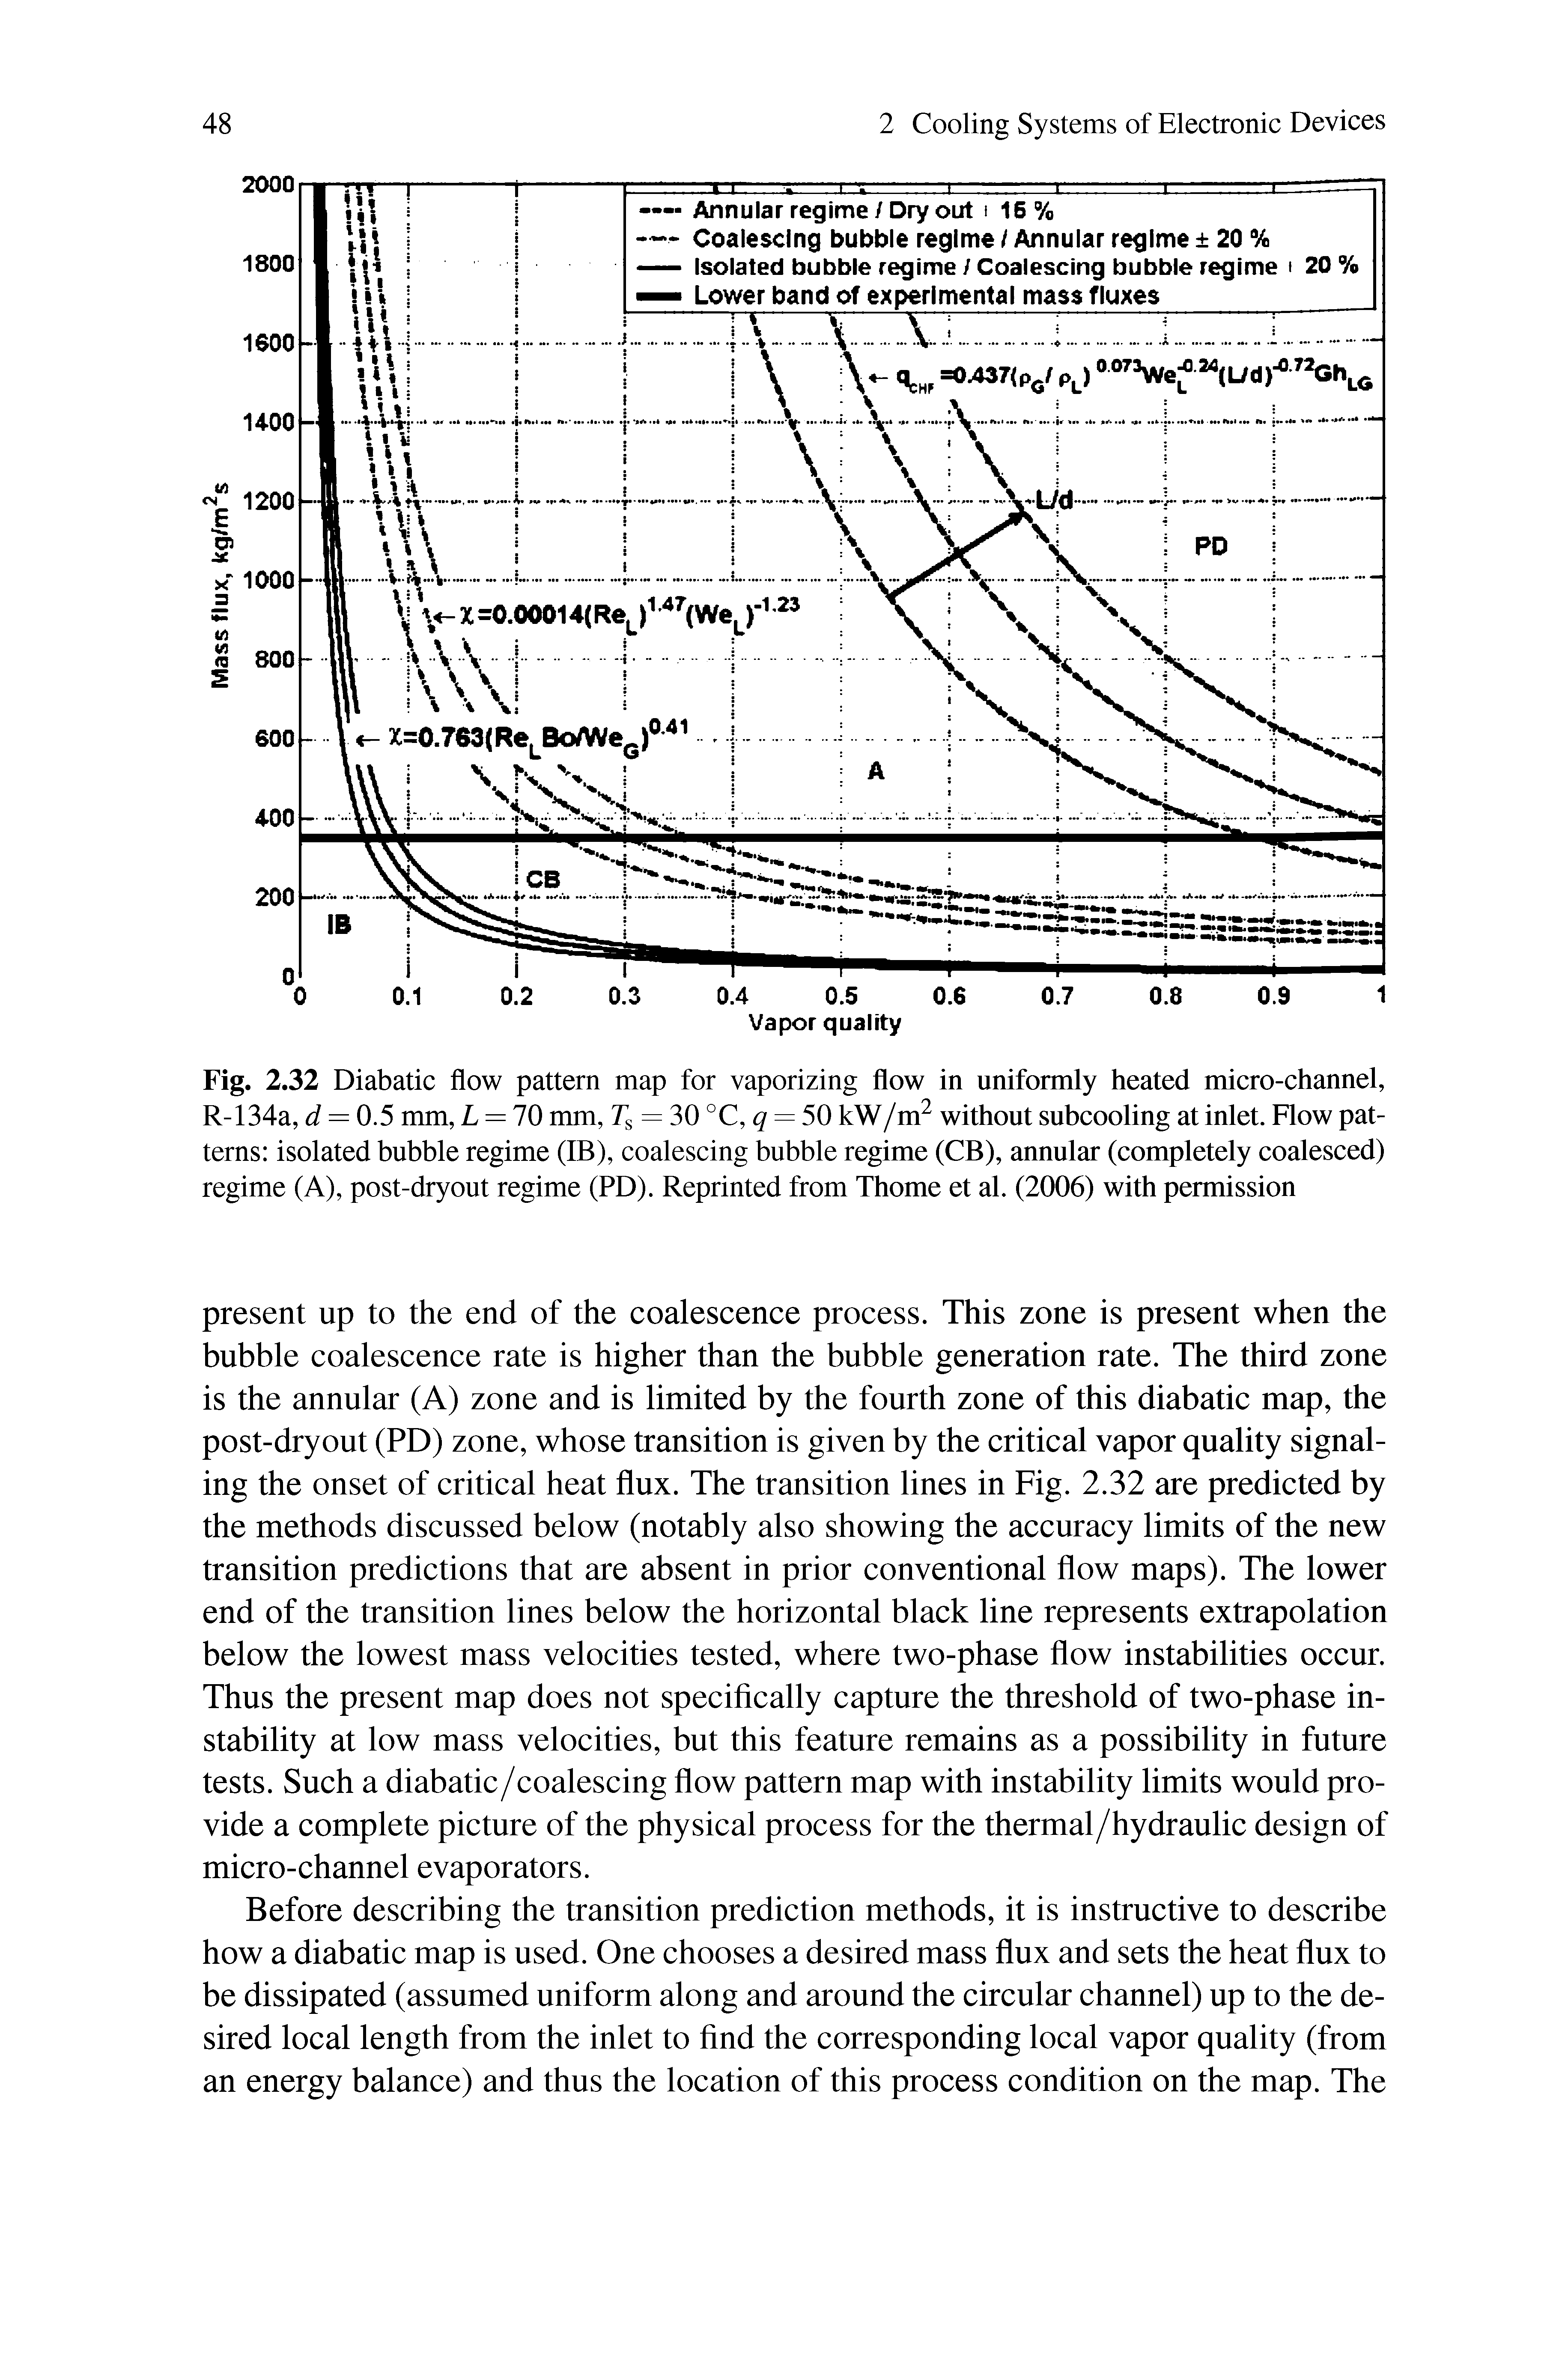 Fig. 2.32 Diabatic flow pattern map for vaporizing flow in uniformly heated micro-channel, R-134a, d = 0.5 mm, L = 70 mm, Tg = 30 °C, = 50 kW/m without subcooling at inlet. Flow patterns isolated bubble regime (IB), coalescing bubble regime (CB), annular (completely coalesced) regime (A), post-dryout regime (PD). Reprinted from Thome et al. (2006) with permission...